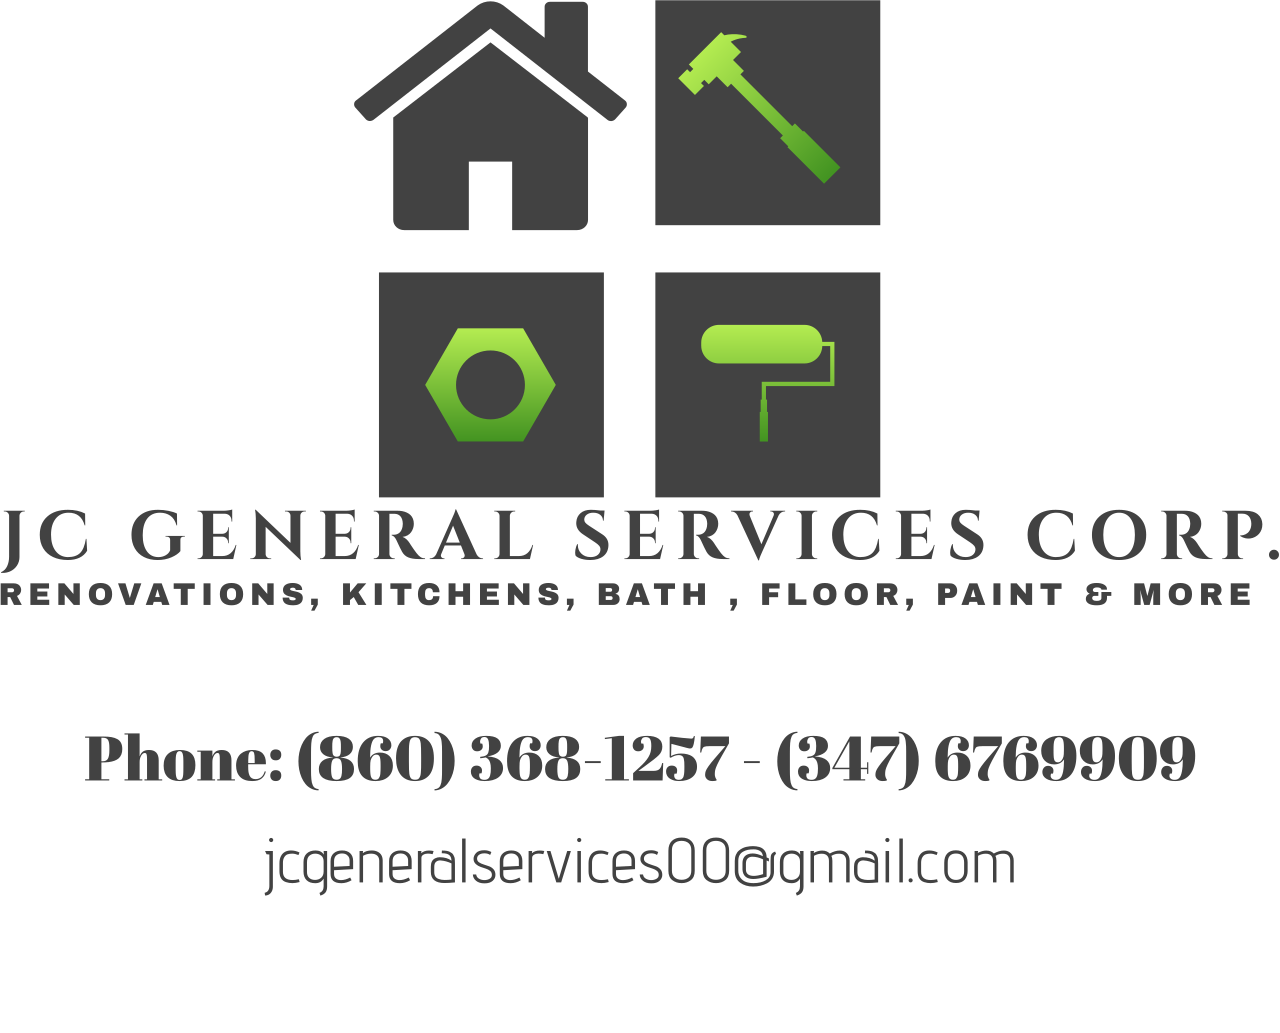 JC GENERAL SERVICES CORP.'s web page